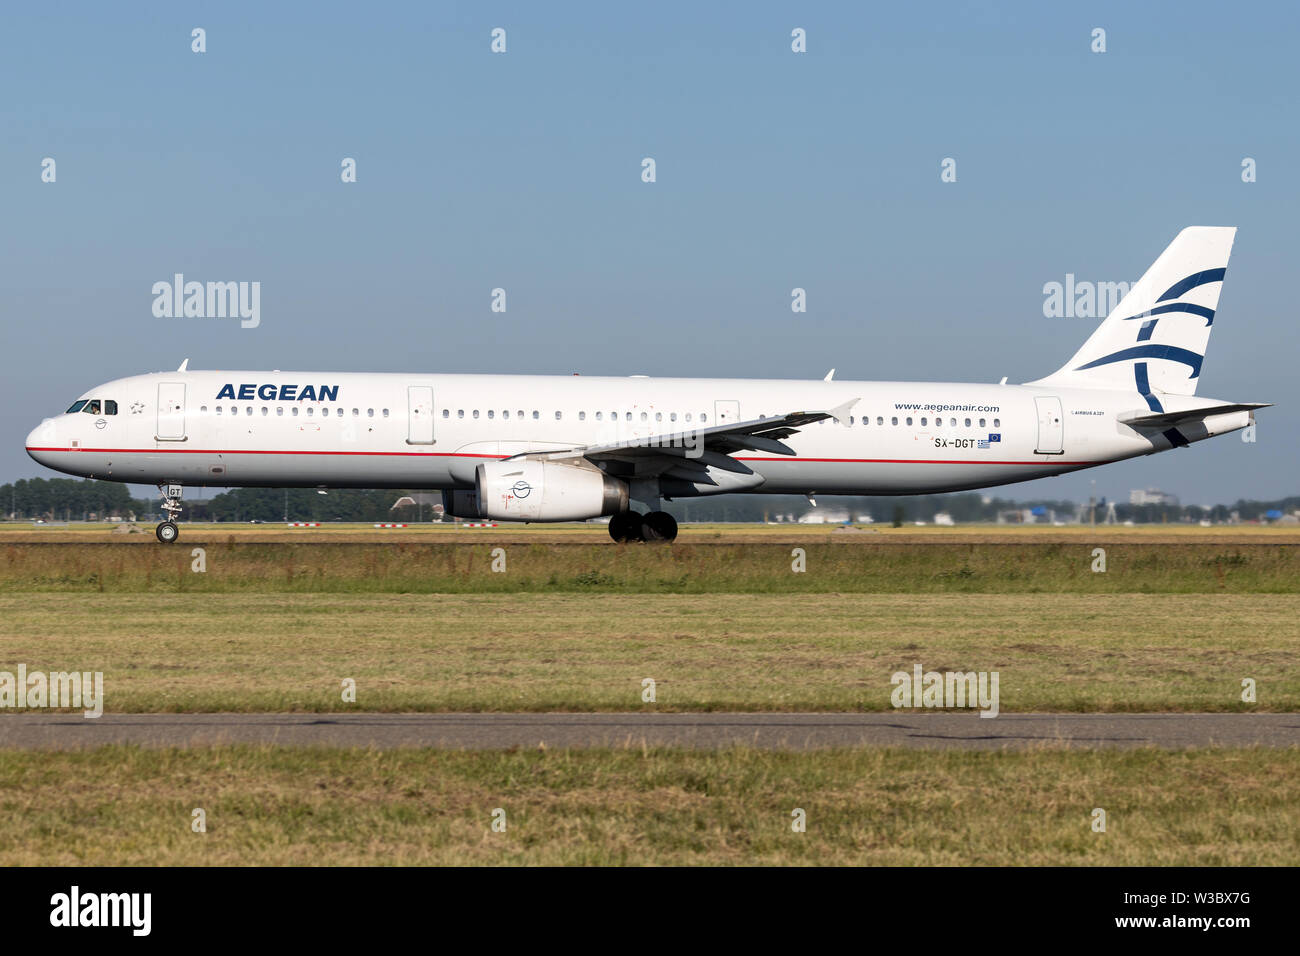 Greek Aegean Airlines Airlines Airbus A321-200 with registration SX-DGT on take off roll on runway 36L (Polderbaan) of Amsterdam Airport Schiphol. Stock Photo